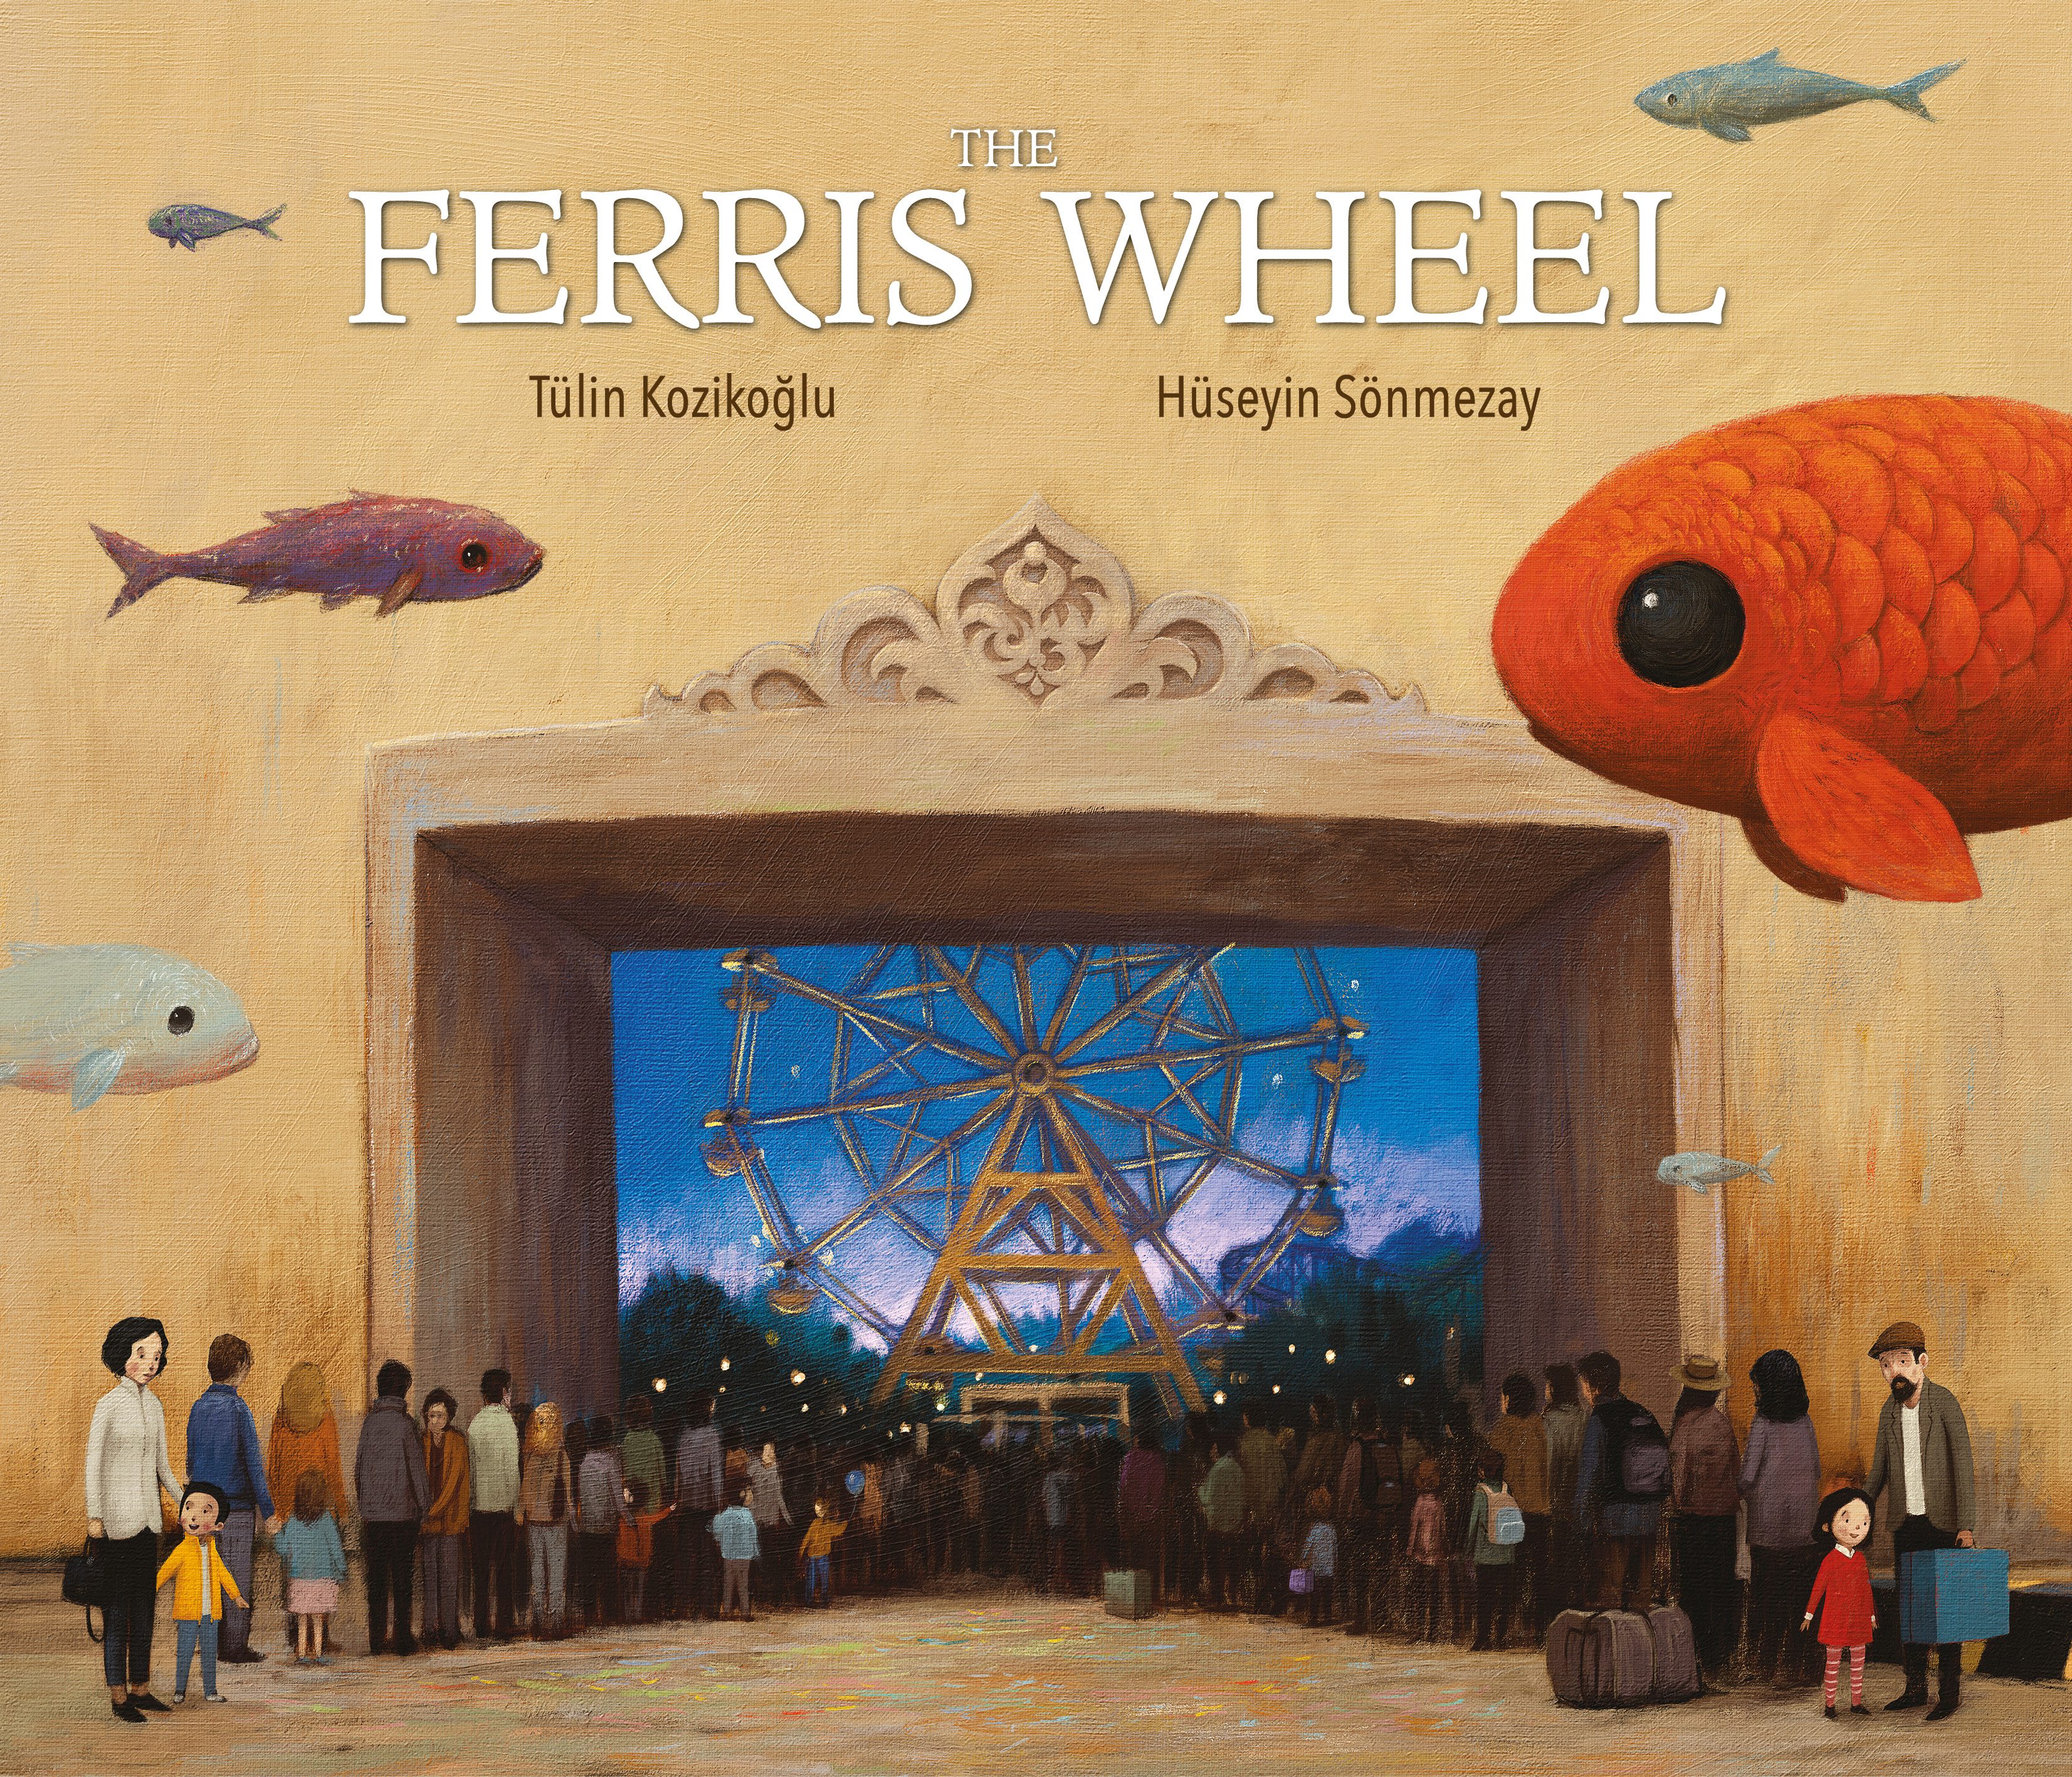 Cover of picture book "The Ferris Wheel." Image has large goldfish floating in foreground above a ferris wheel set off in a rectangular stone arch. There are queues of people flanking each side of stone arch framing the ferris wheel. On the left hand side, there is boy with his mother. He is wearing a yellow raincoat. On the right hand side a girl is accompanied by her father. She wears red, and he carries a blue suitcase. 